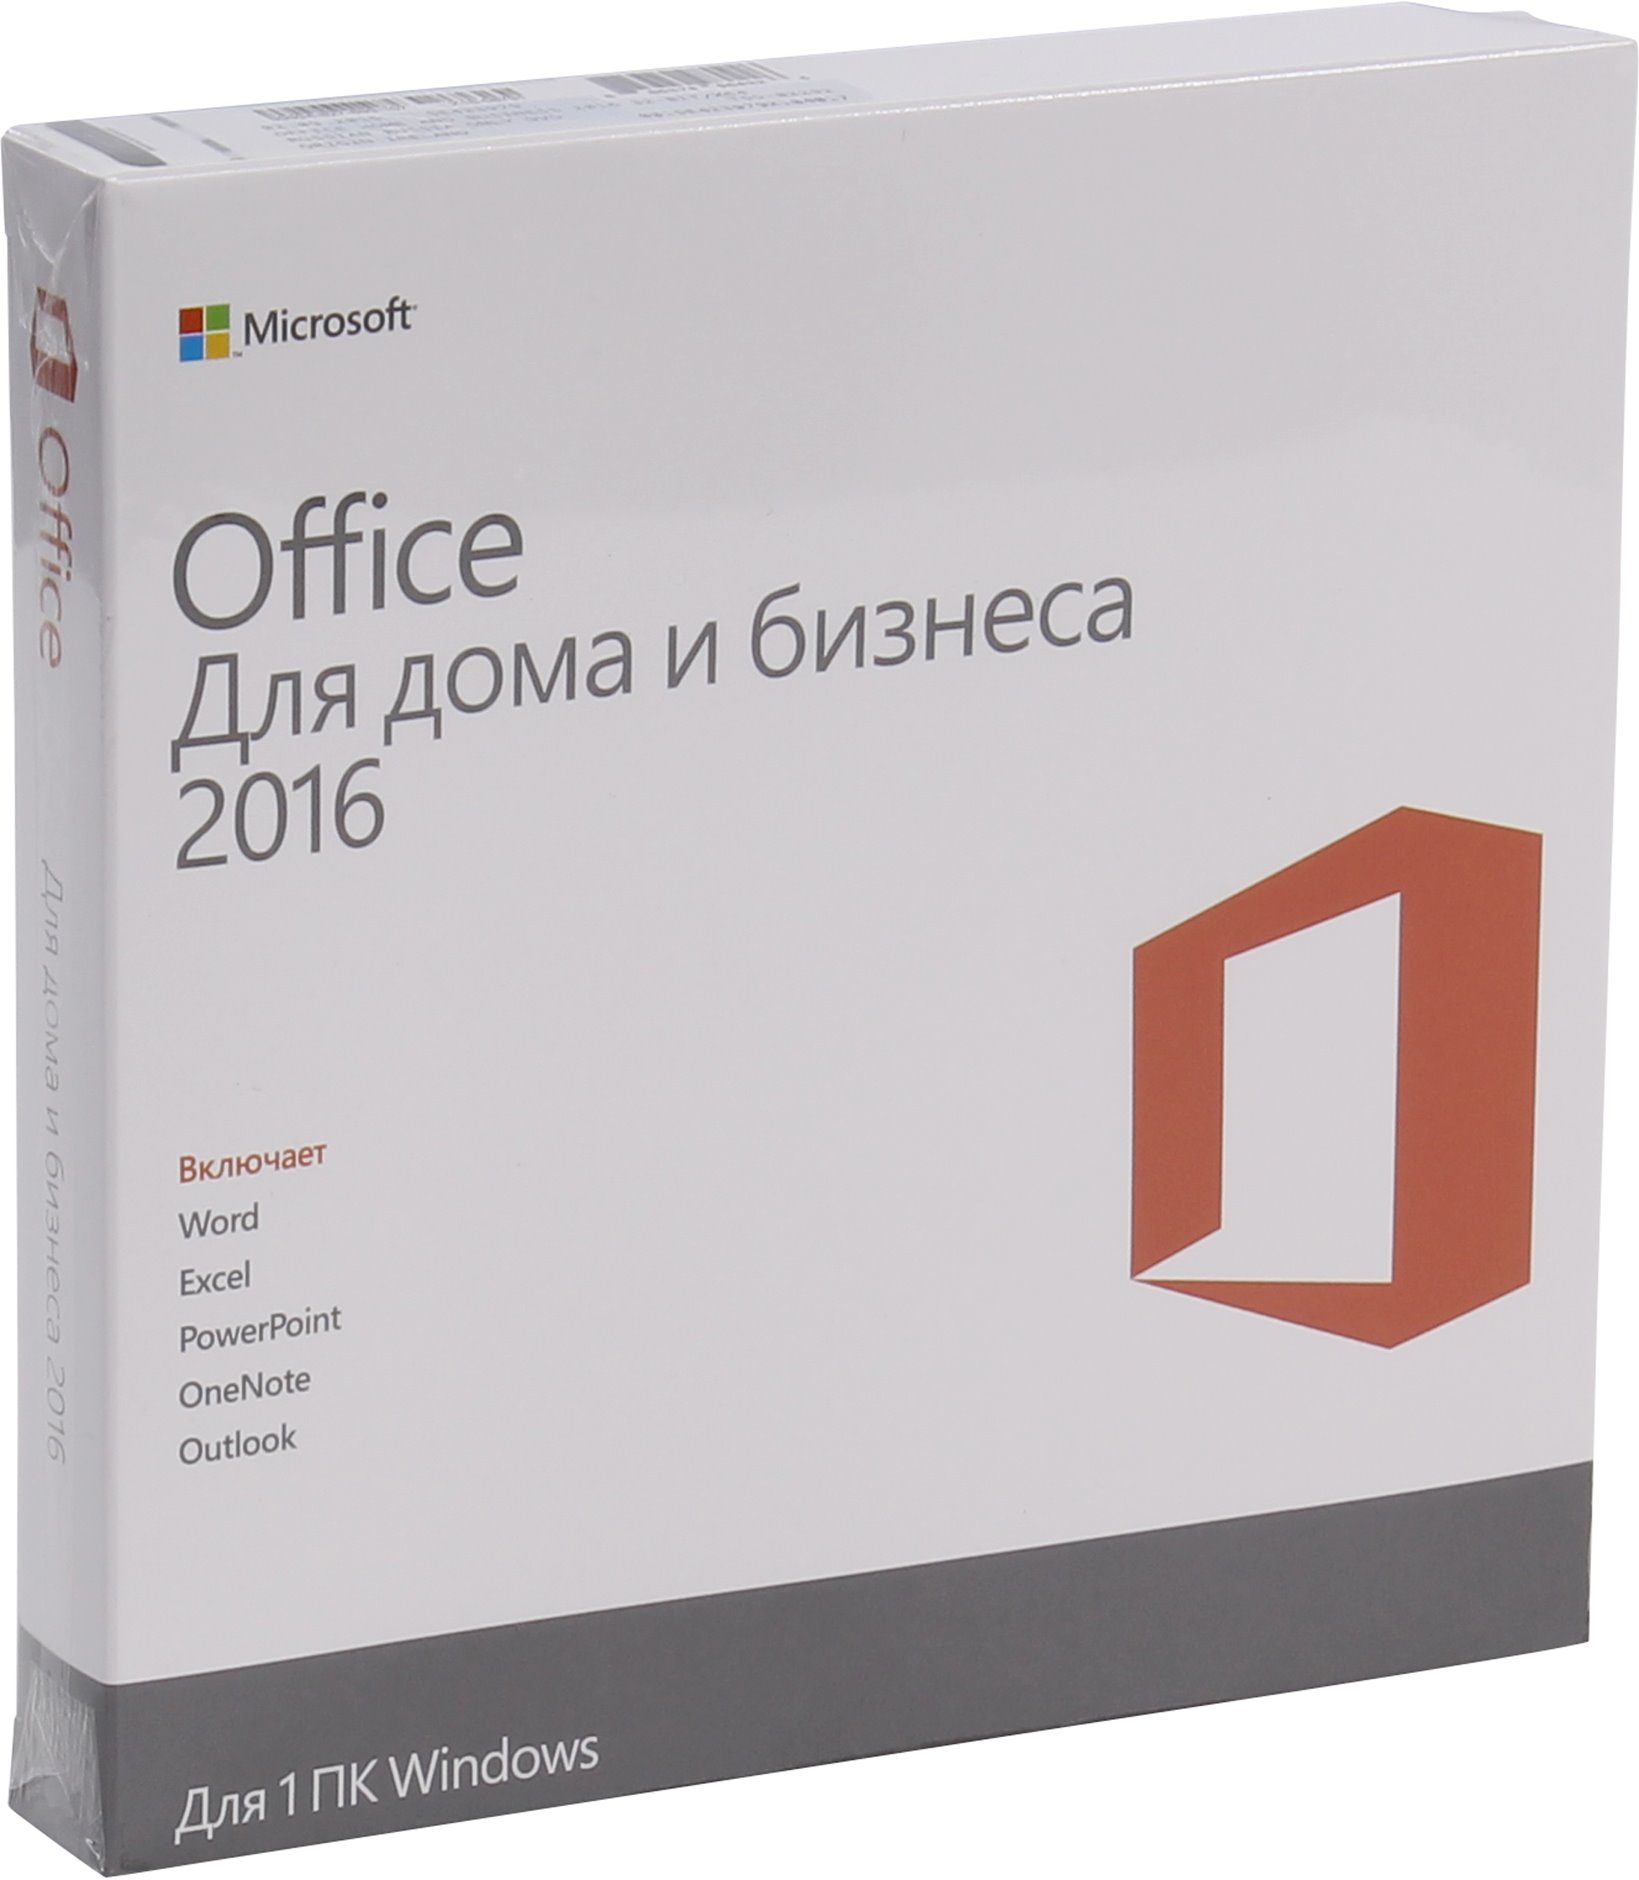 ПО Microsoft BOX / Office Home and Business 2016 Russian  (T5D-02292 / T5D-02705)